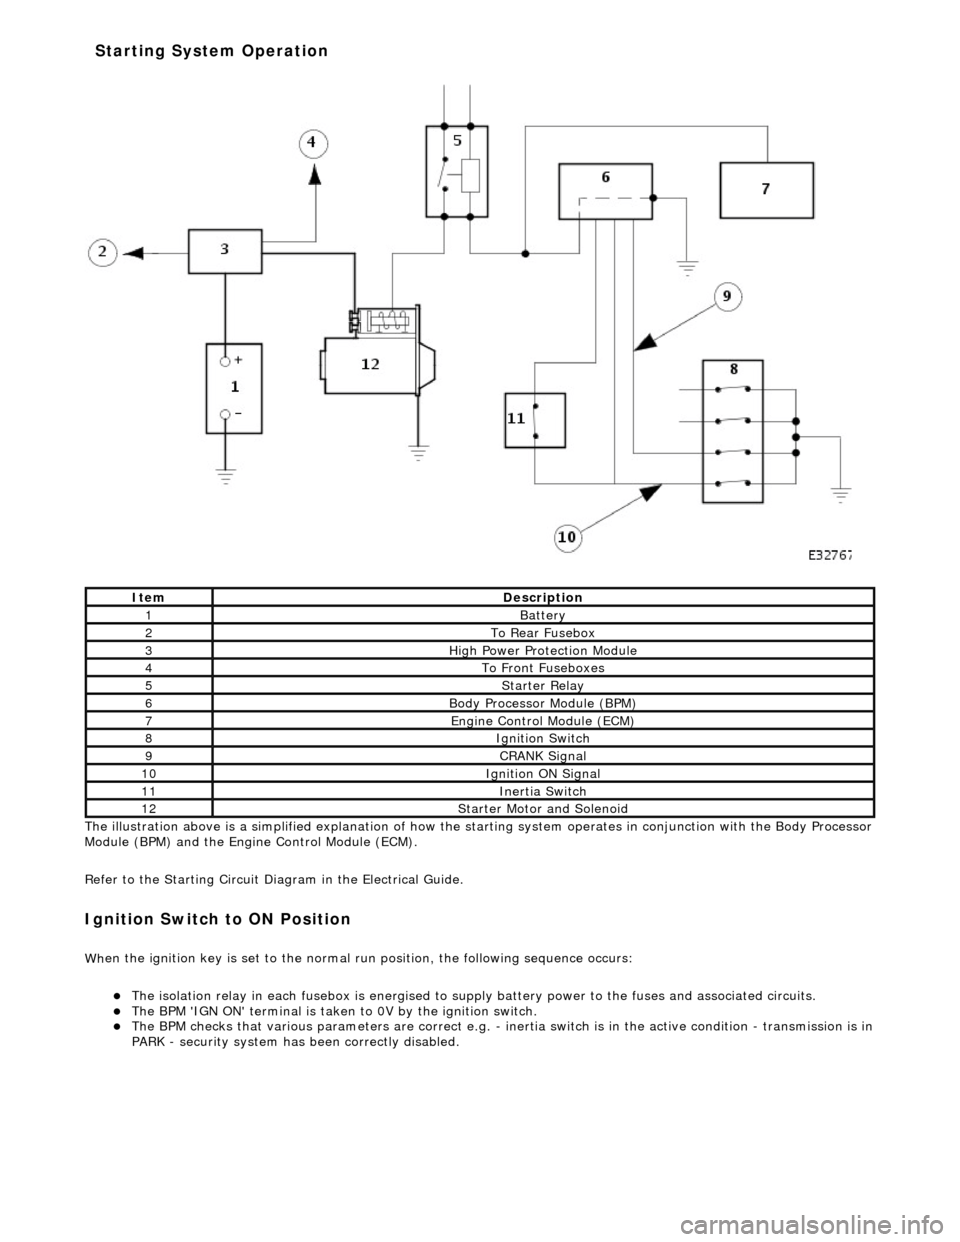 JAGUAR X308 1998 2.G Workshop Manual  
The  il
 lustration above is a simplified expl
anation of how the starting system operates in conjunction with the Body Processor 
Module (BPM) and the Engine  Control Module (ECM). 
Refer to the St